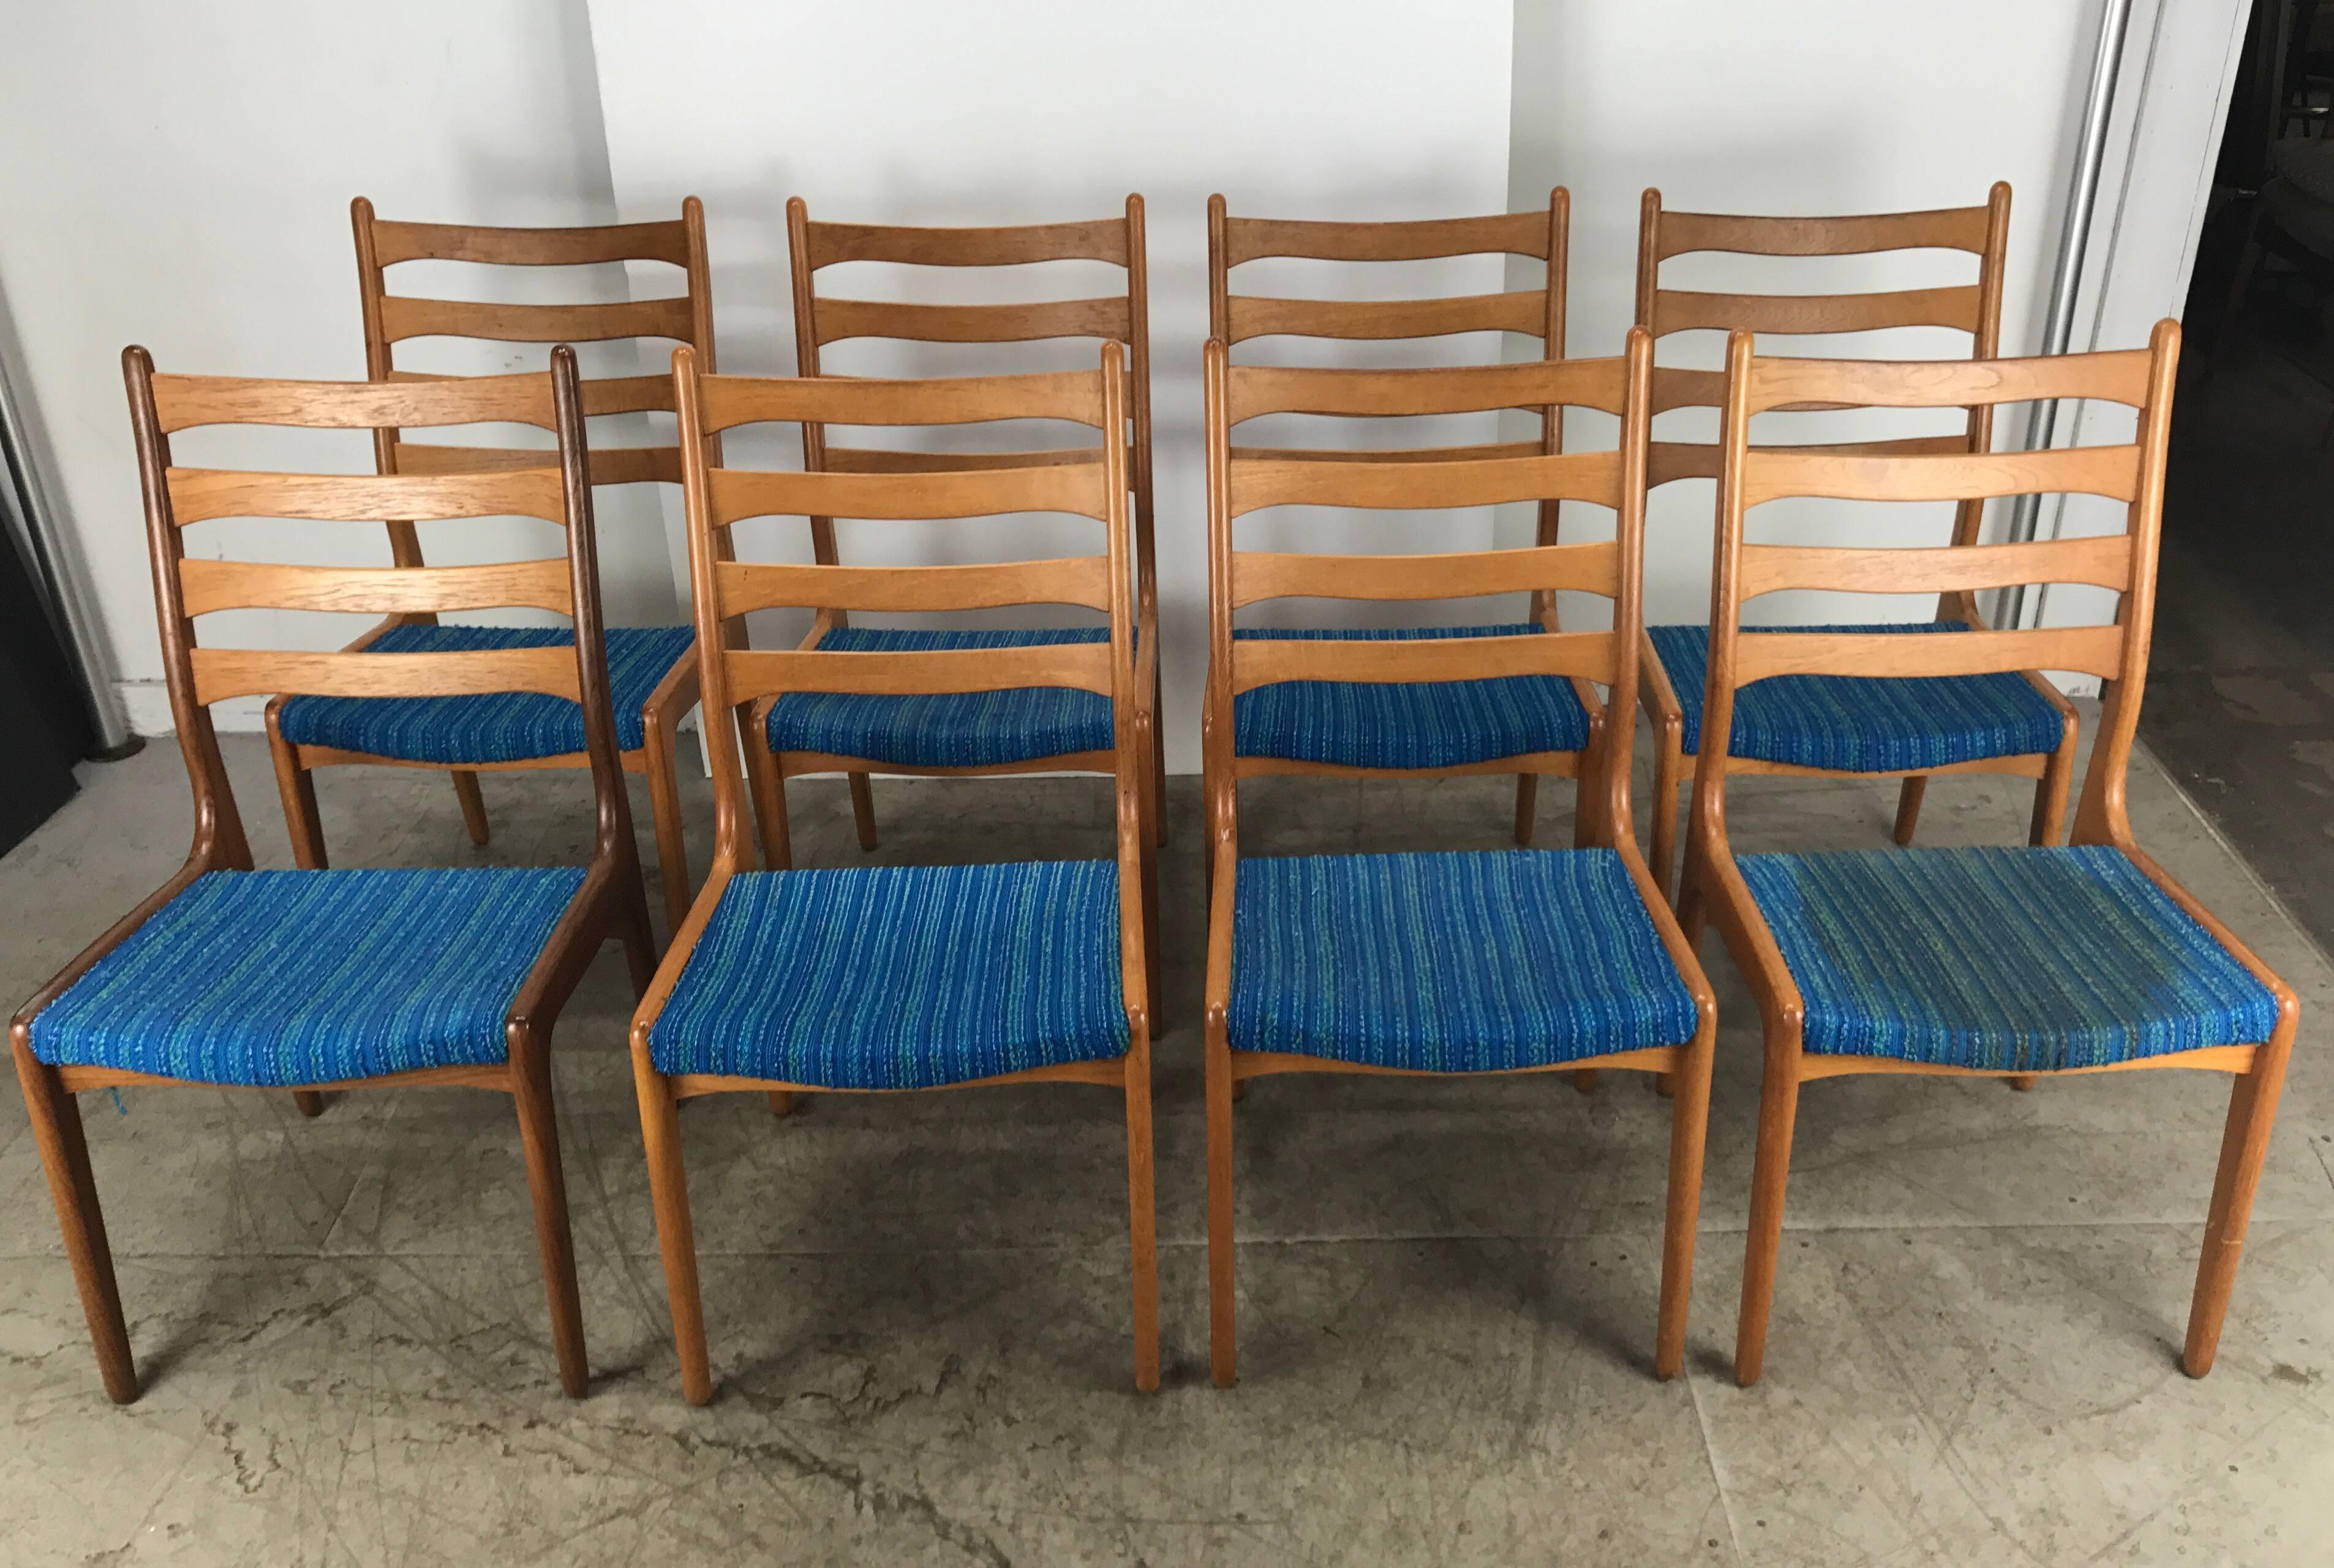 Set of eight Poul Volther teak side chairs by Frem Rojle, Classic Mid-Century design, superior quality and construction, finger joinery. Retains original Alexander Girard electric blue wool fabric, stunning, hand delivery available to New York City